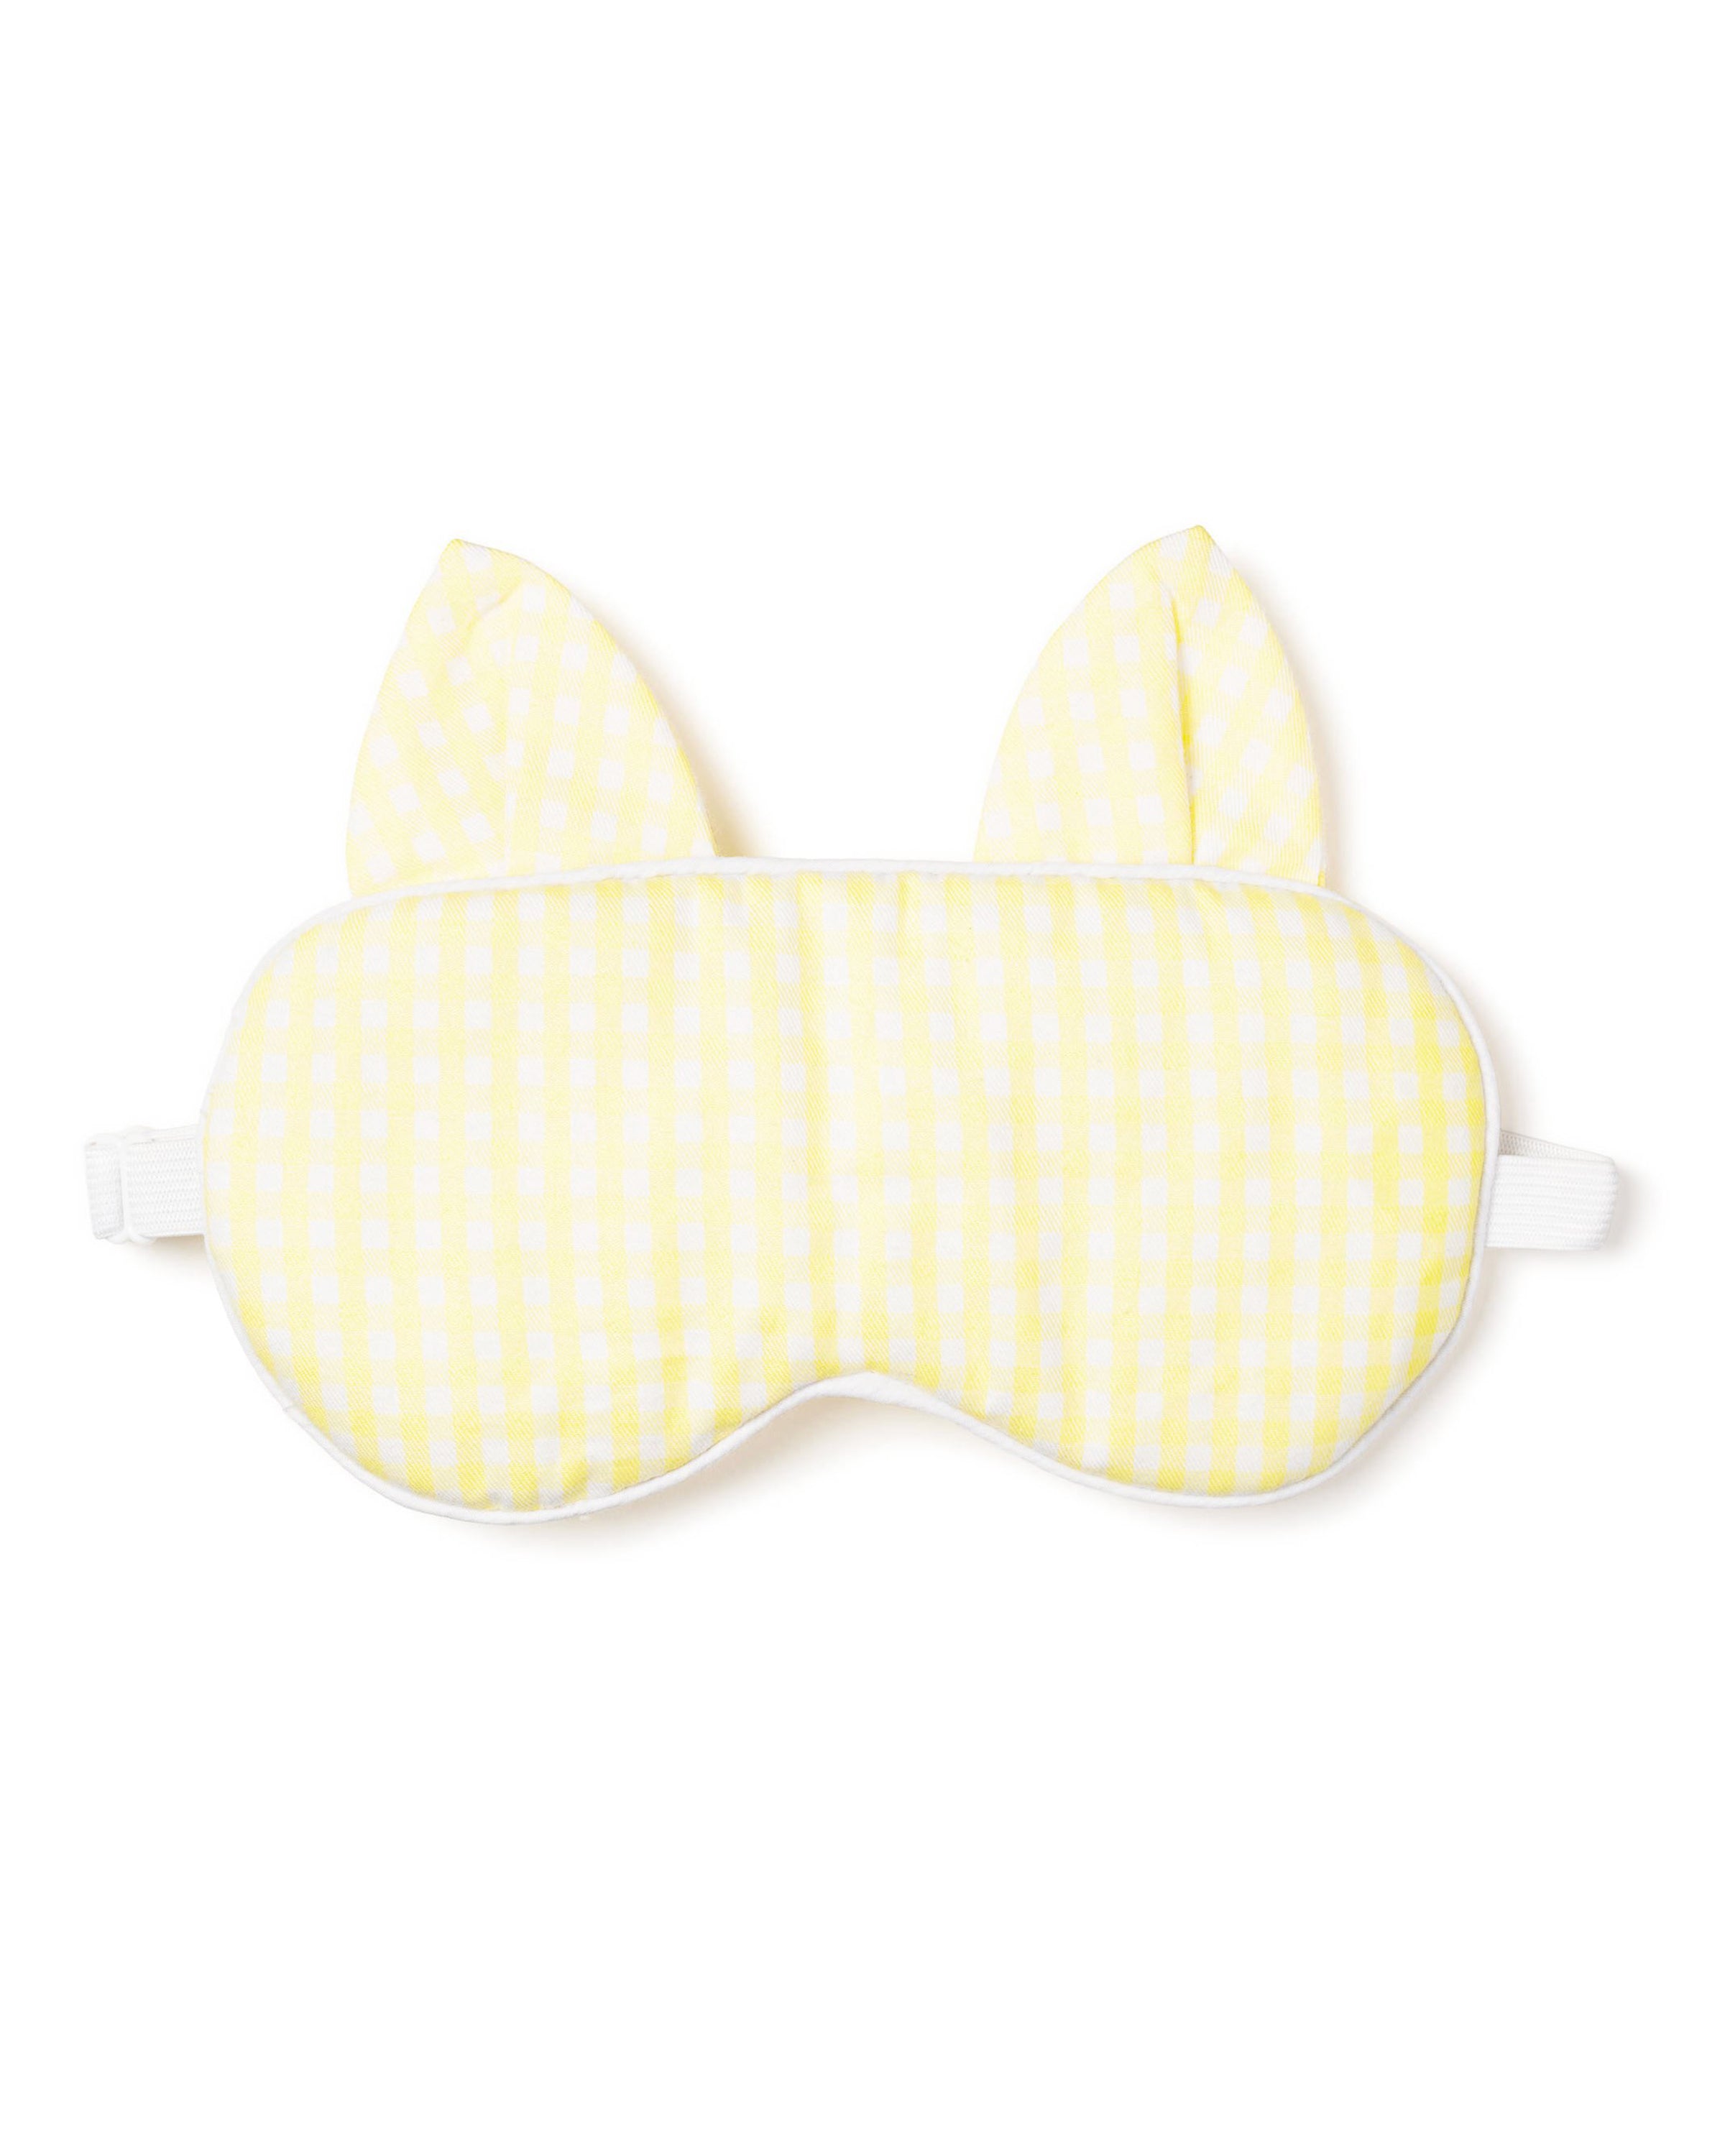 Adult's Twill Kitty Sleep Mask in Yellow Gingham